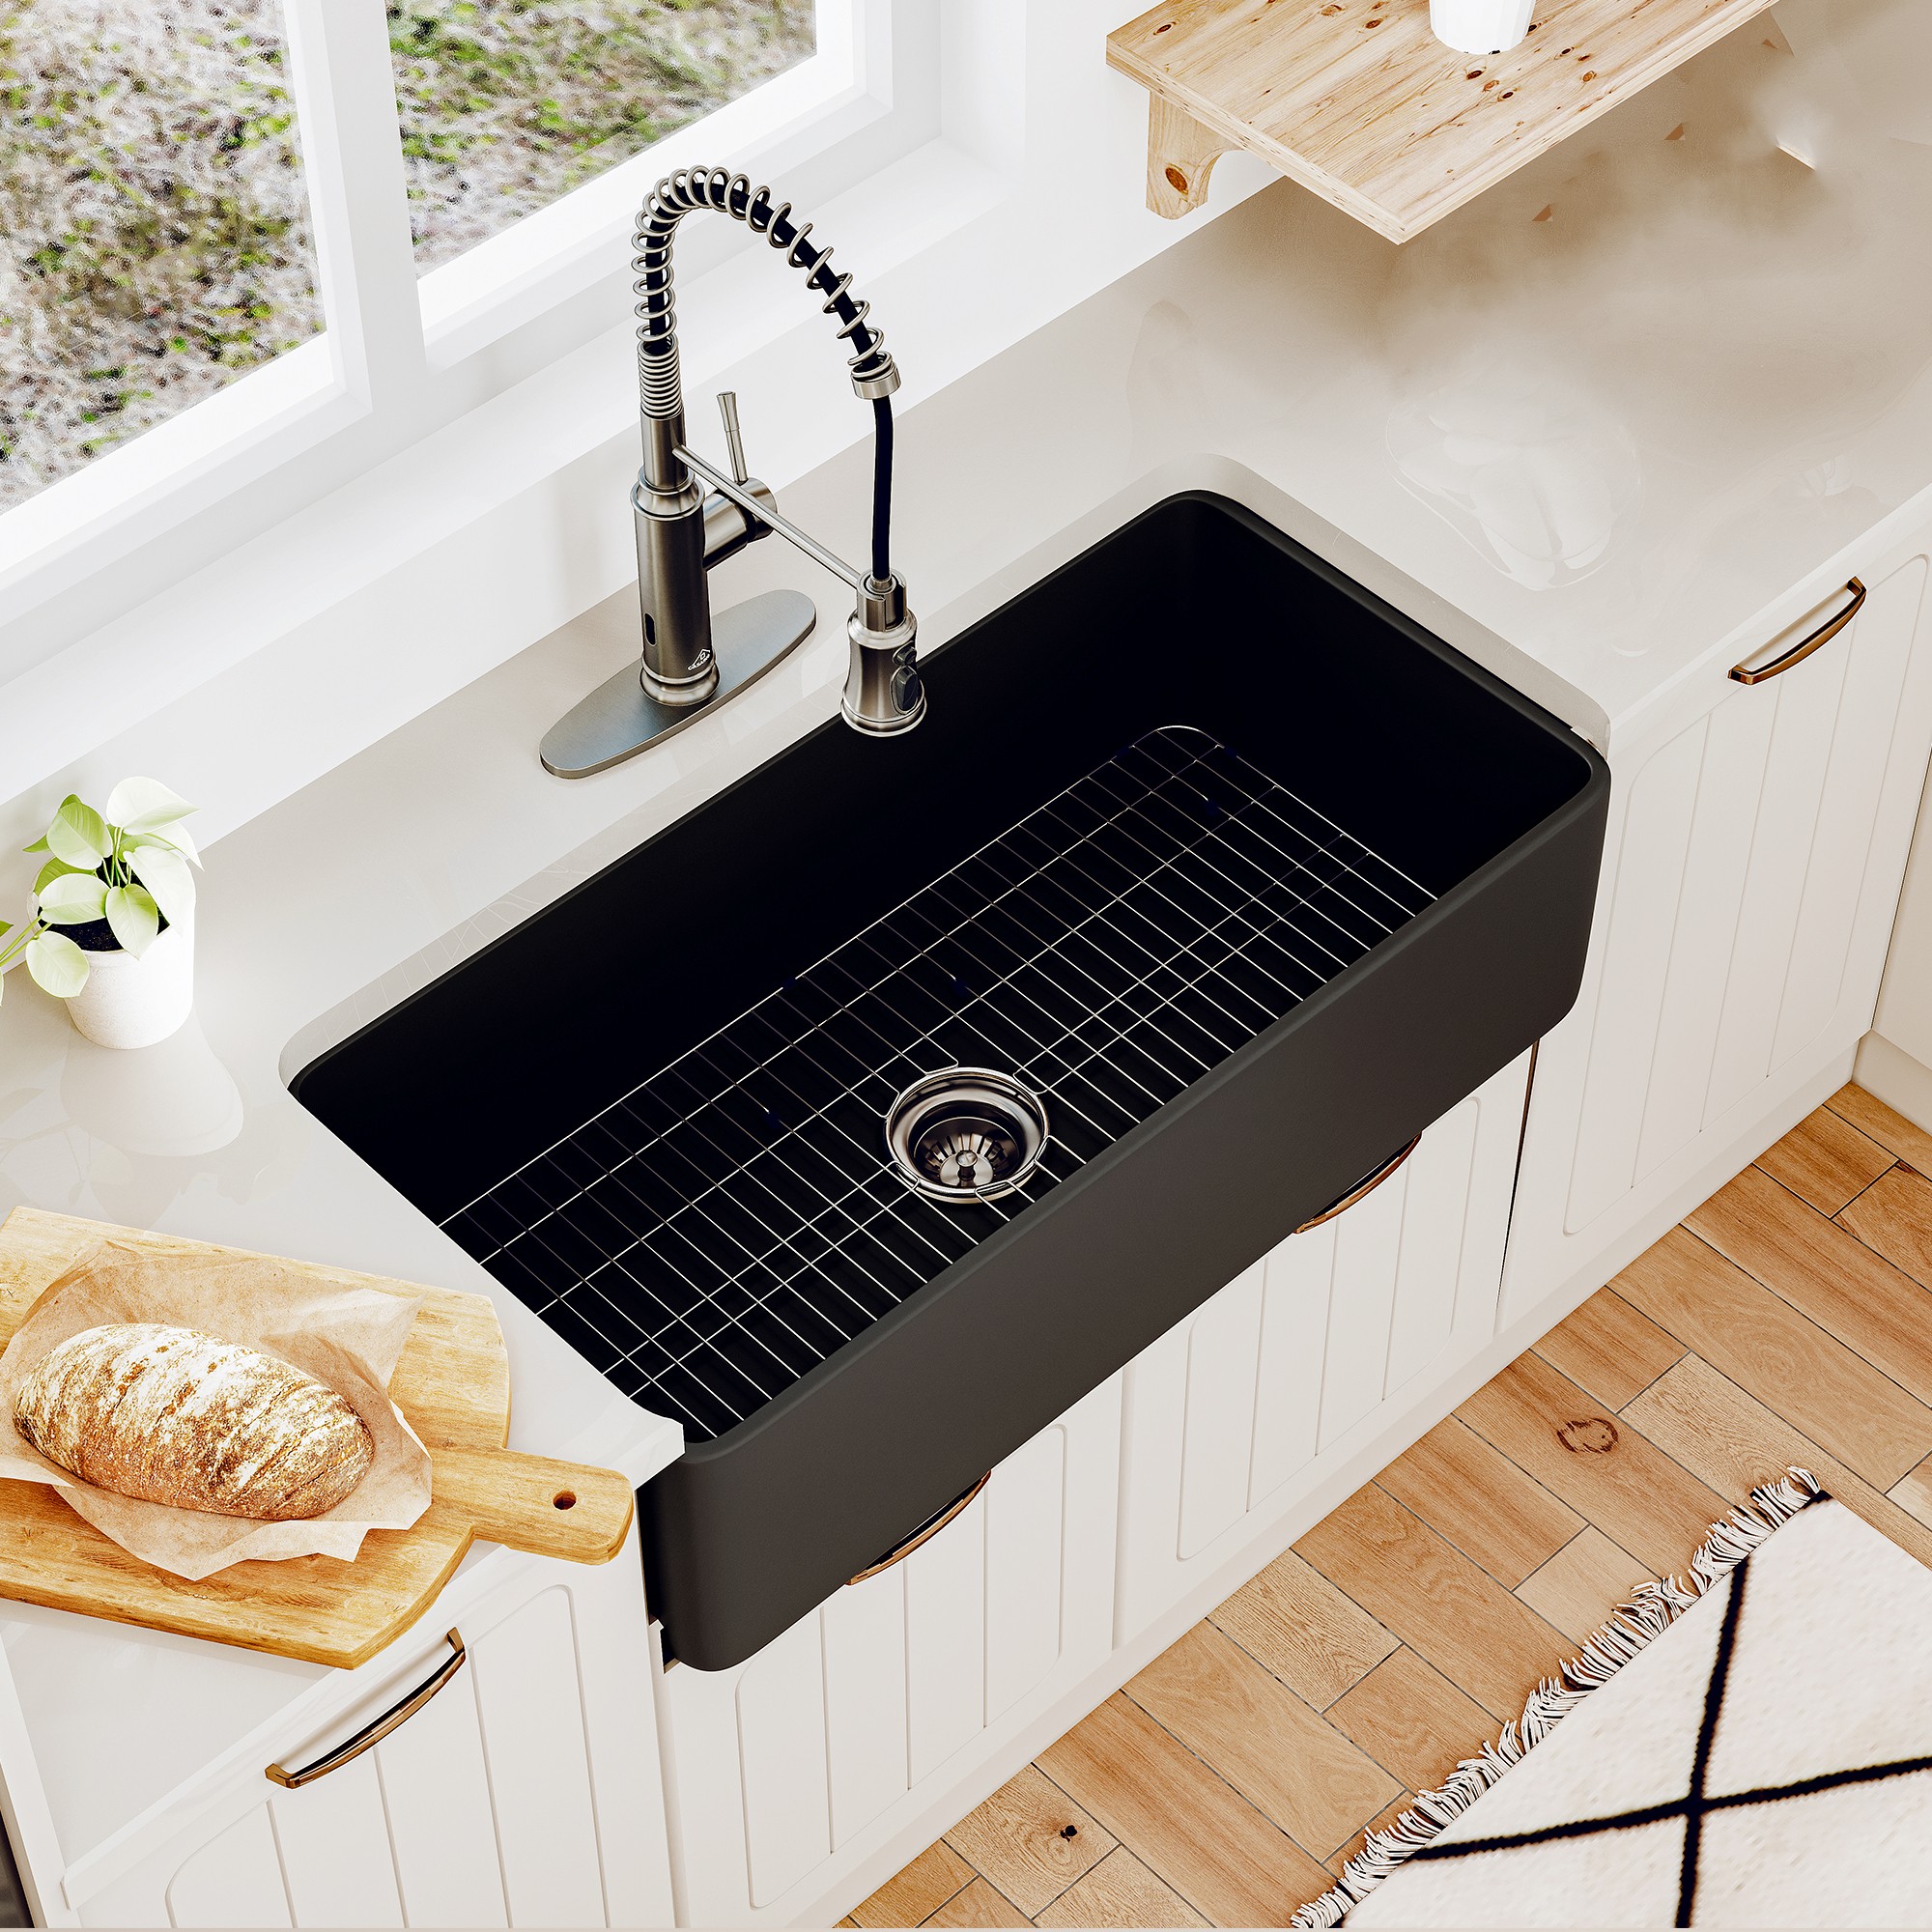 CASAINC Fireclay 36 in. Single Bowl Farmhouse Apron Kitchen Sink with Bottom Grid and Strainers With cUPC Certified, in Glossy White/Matte Black/Matte Gray